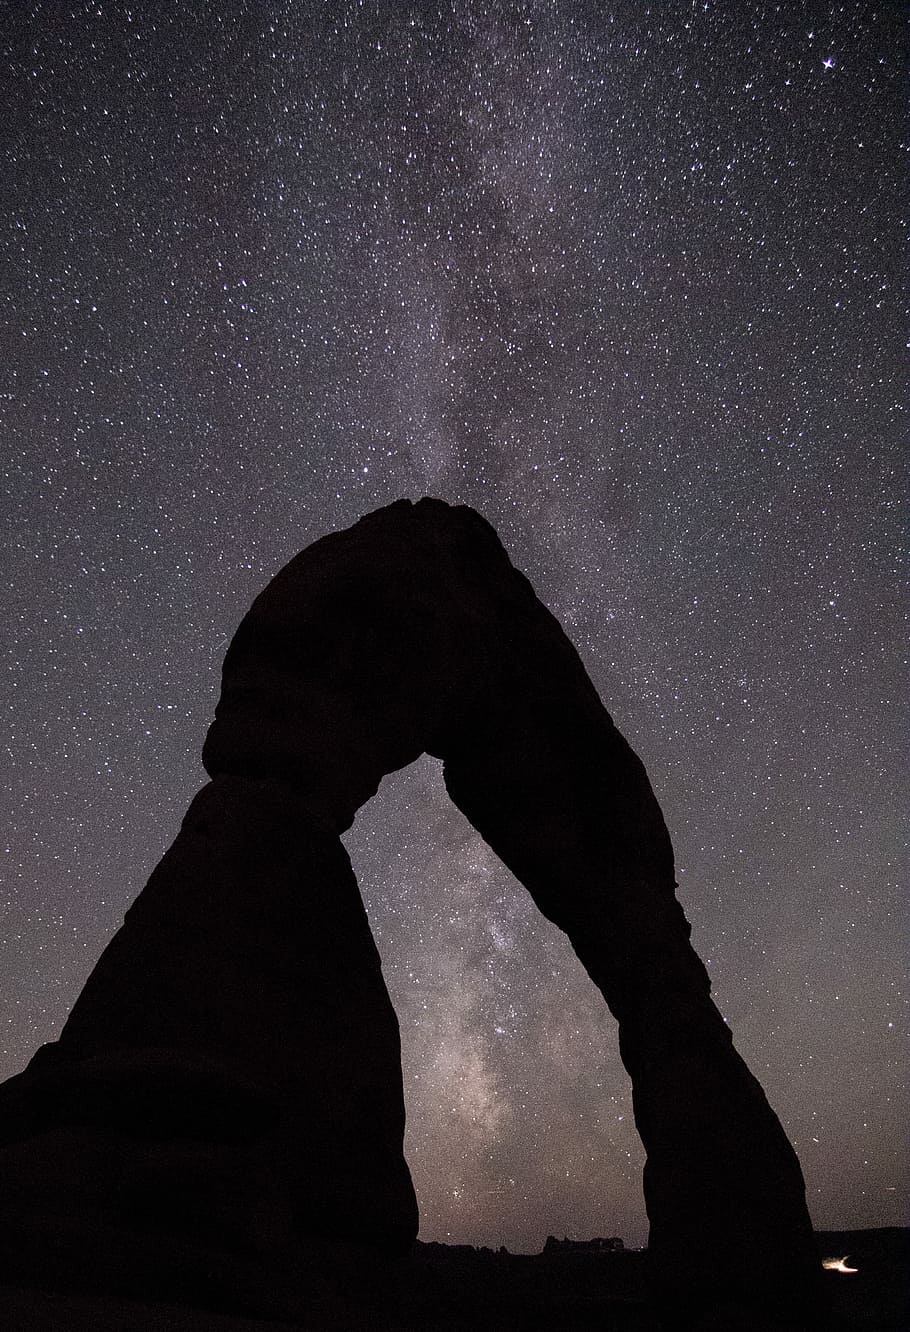 Free Download Hd Wallpaper Silhouette Of Rock Formation At Night